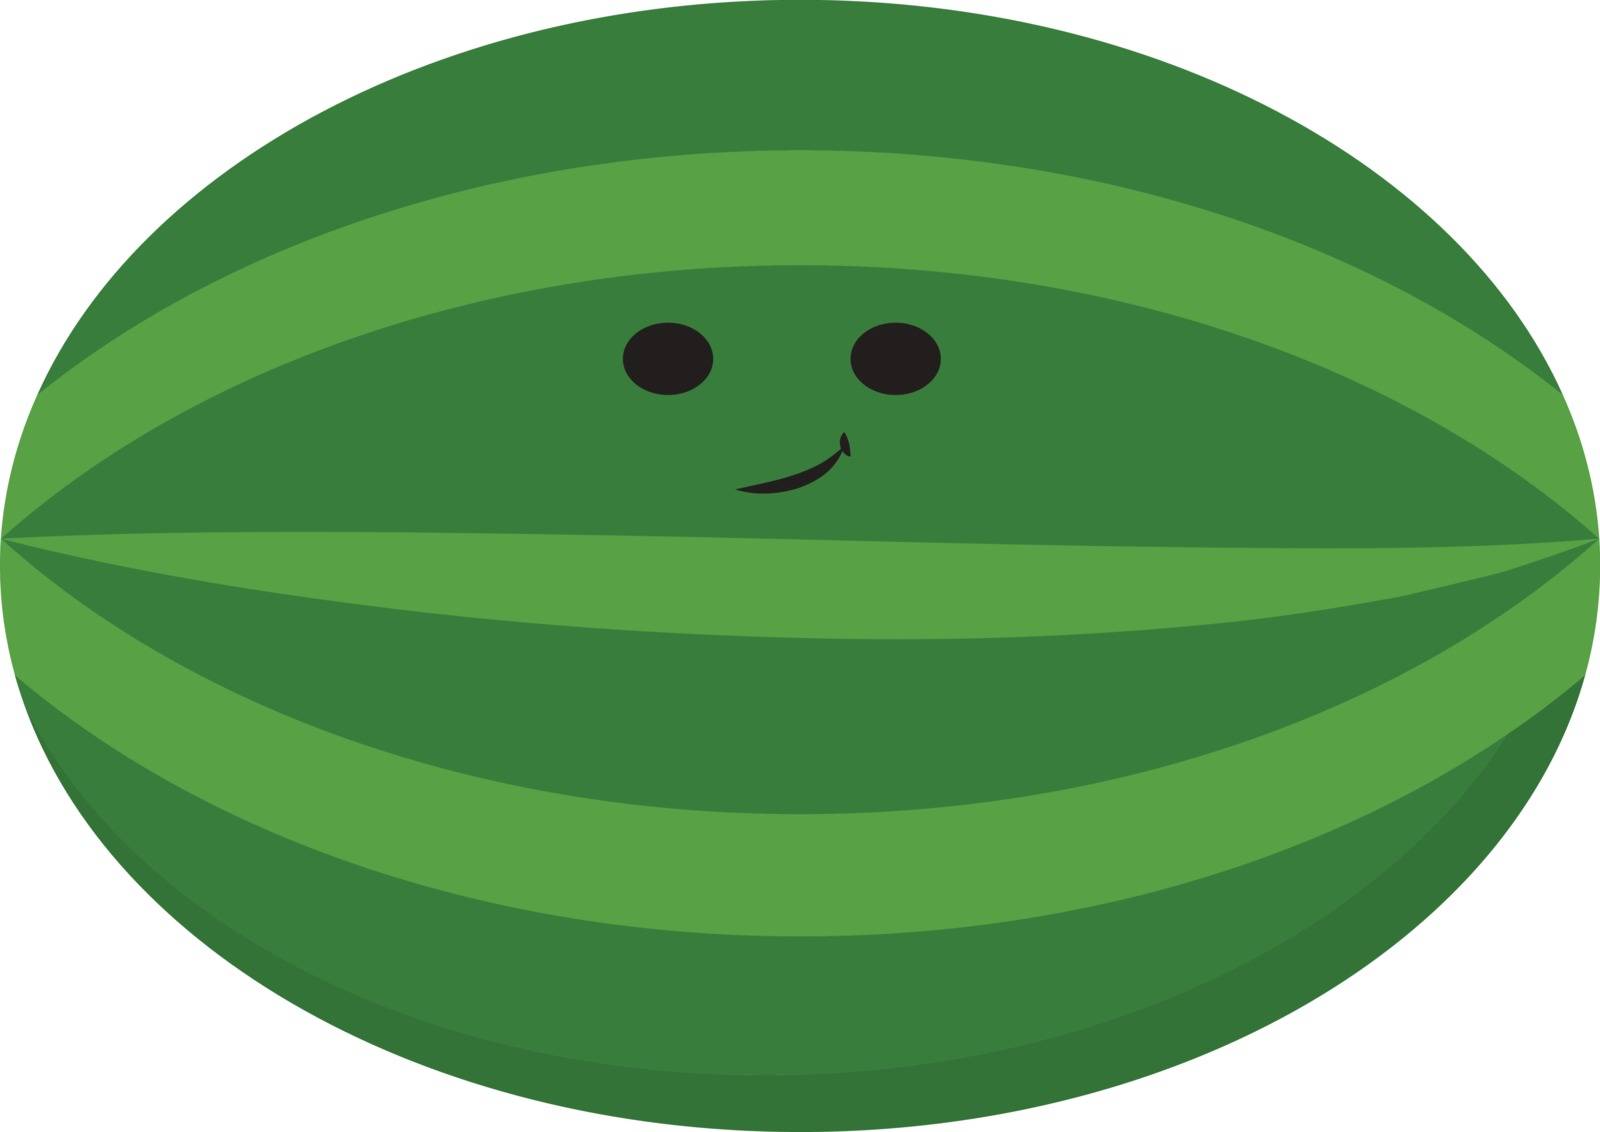 Emoji of a smiling watermelon/Cartoon watermelon, vector or colo by Morphart